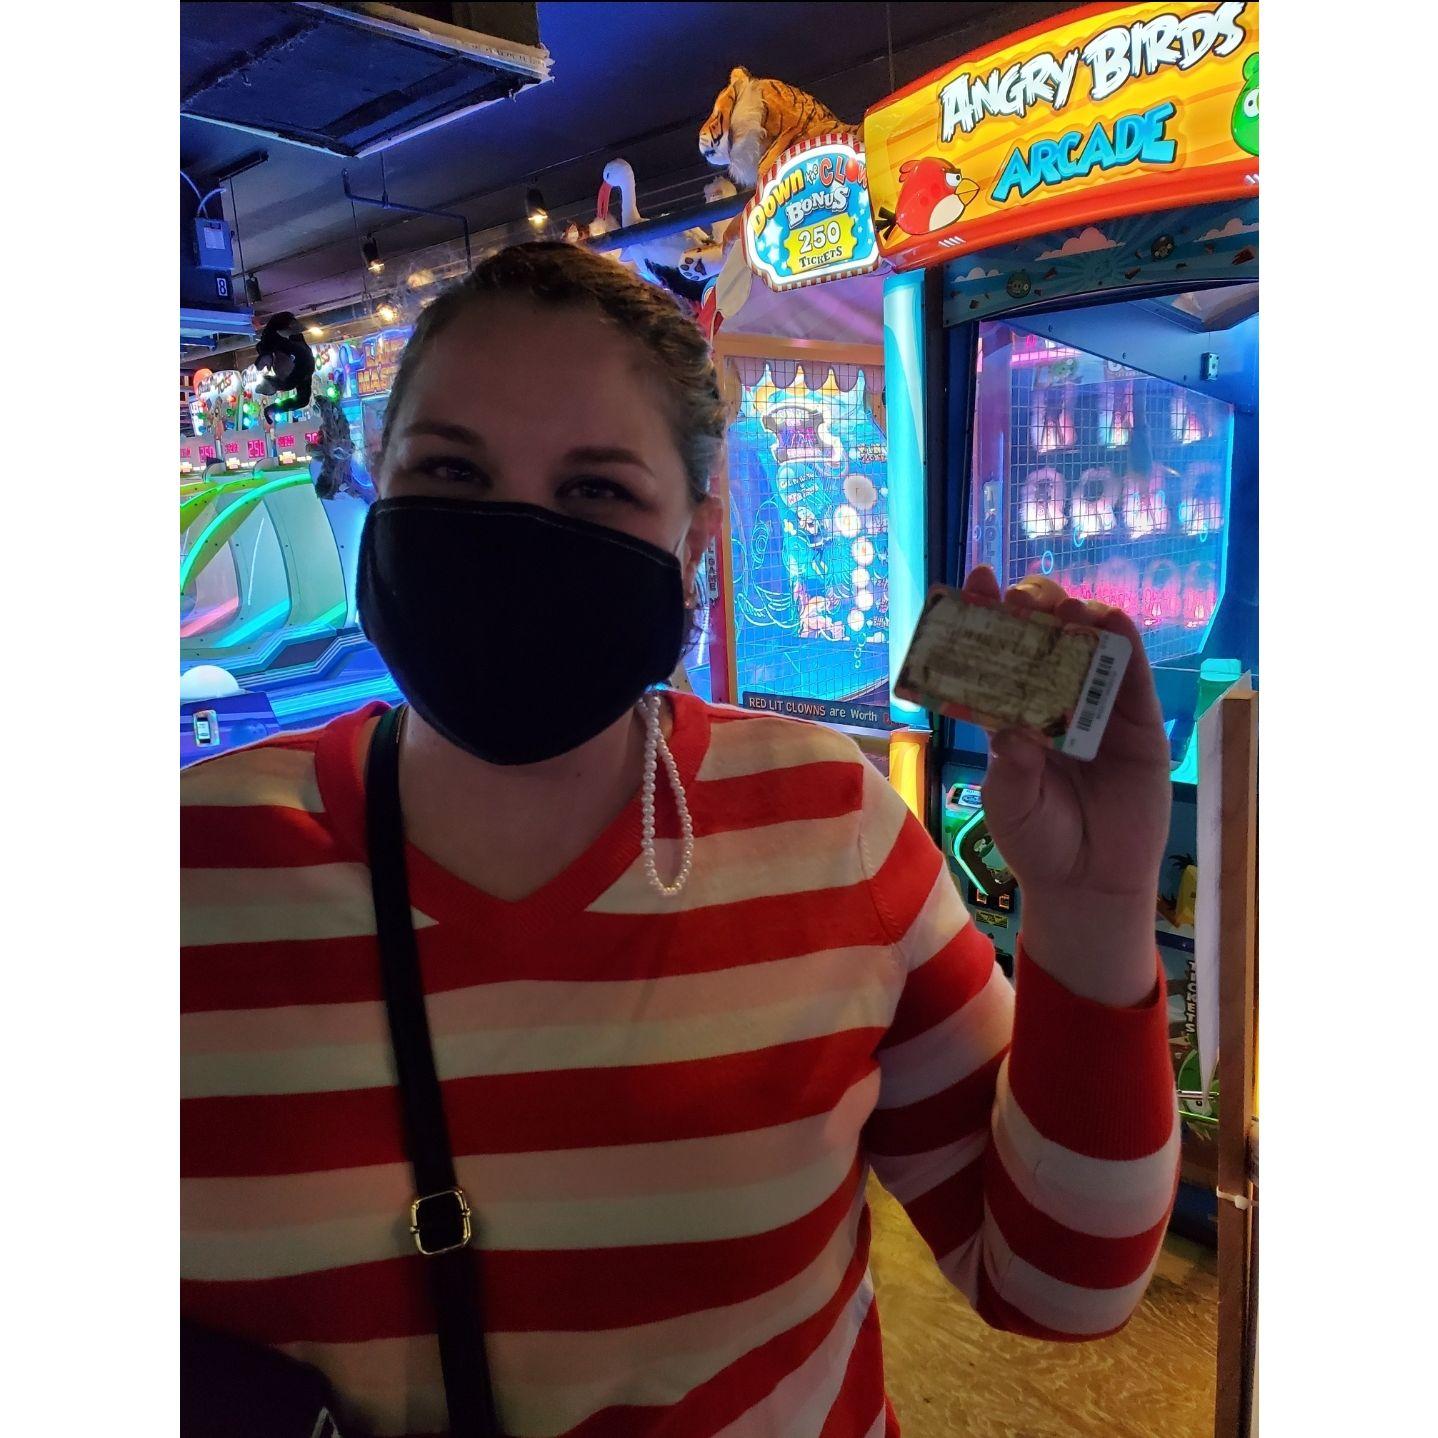 While hitting the board Ocean City, Md... $100000 later and we finally got all of the cards in the Willy Wonka set from the arcade!